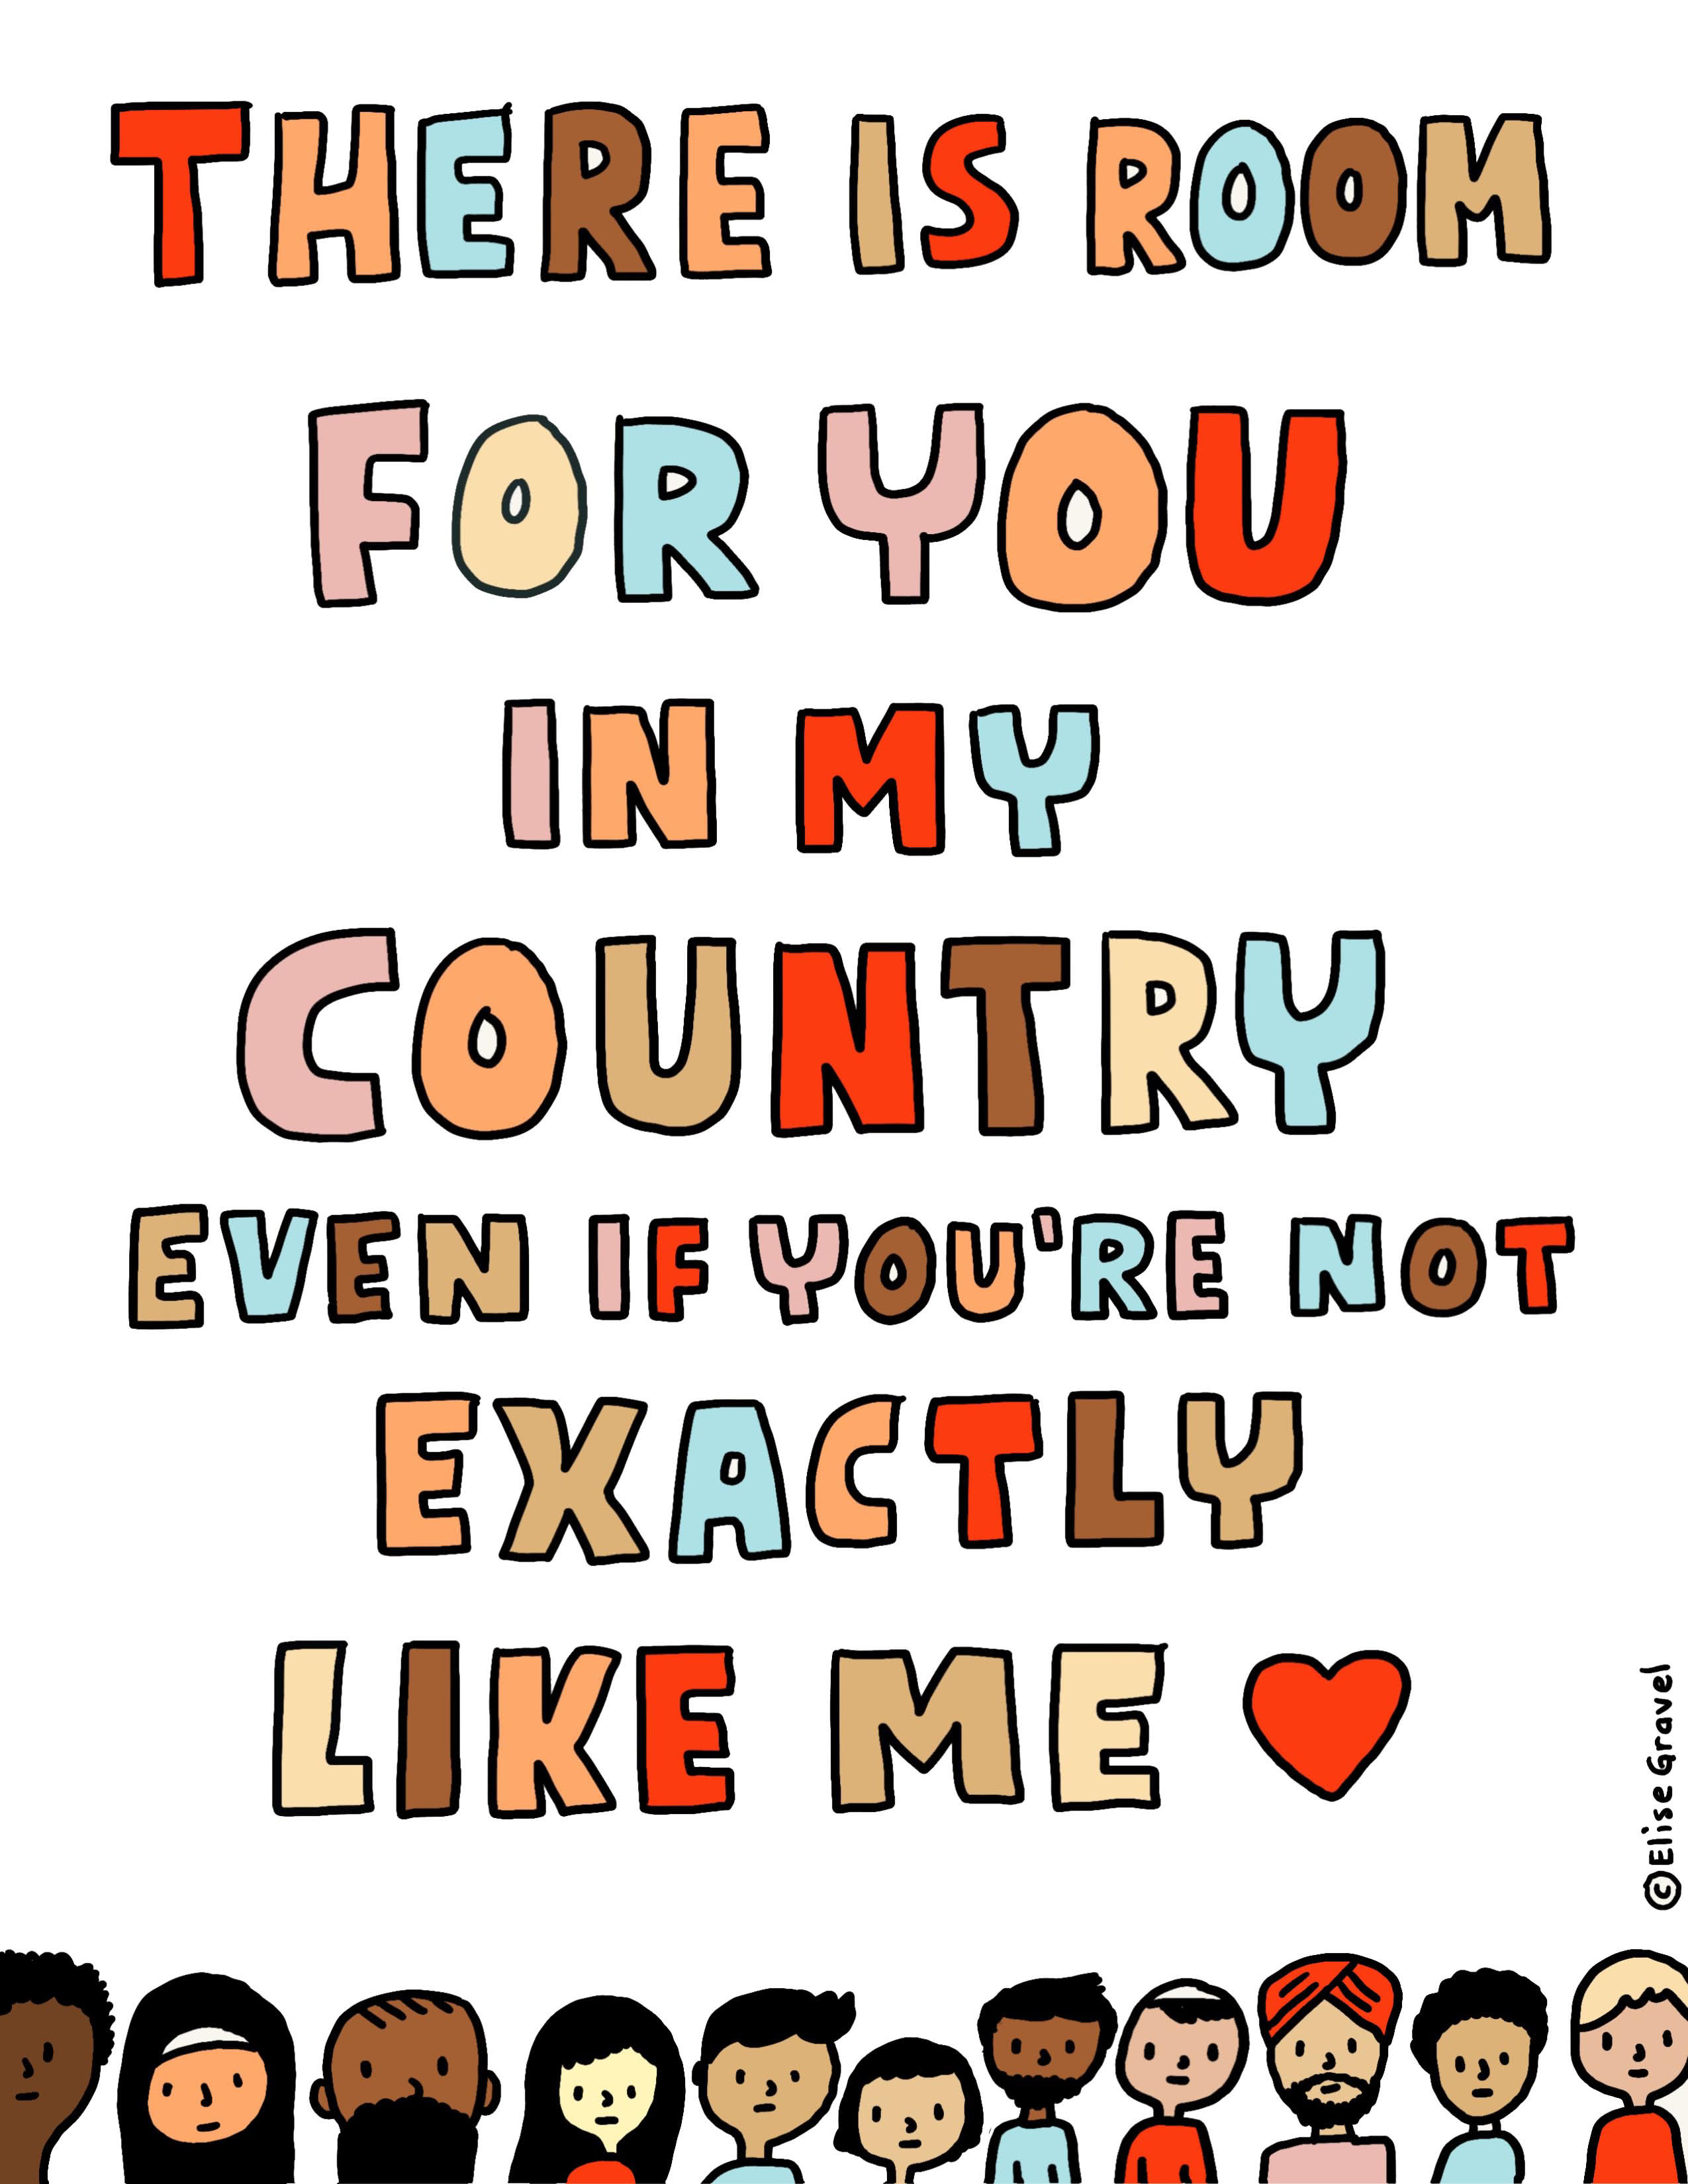 There is room for you in my country